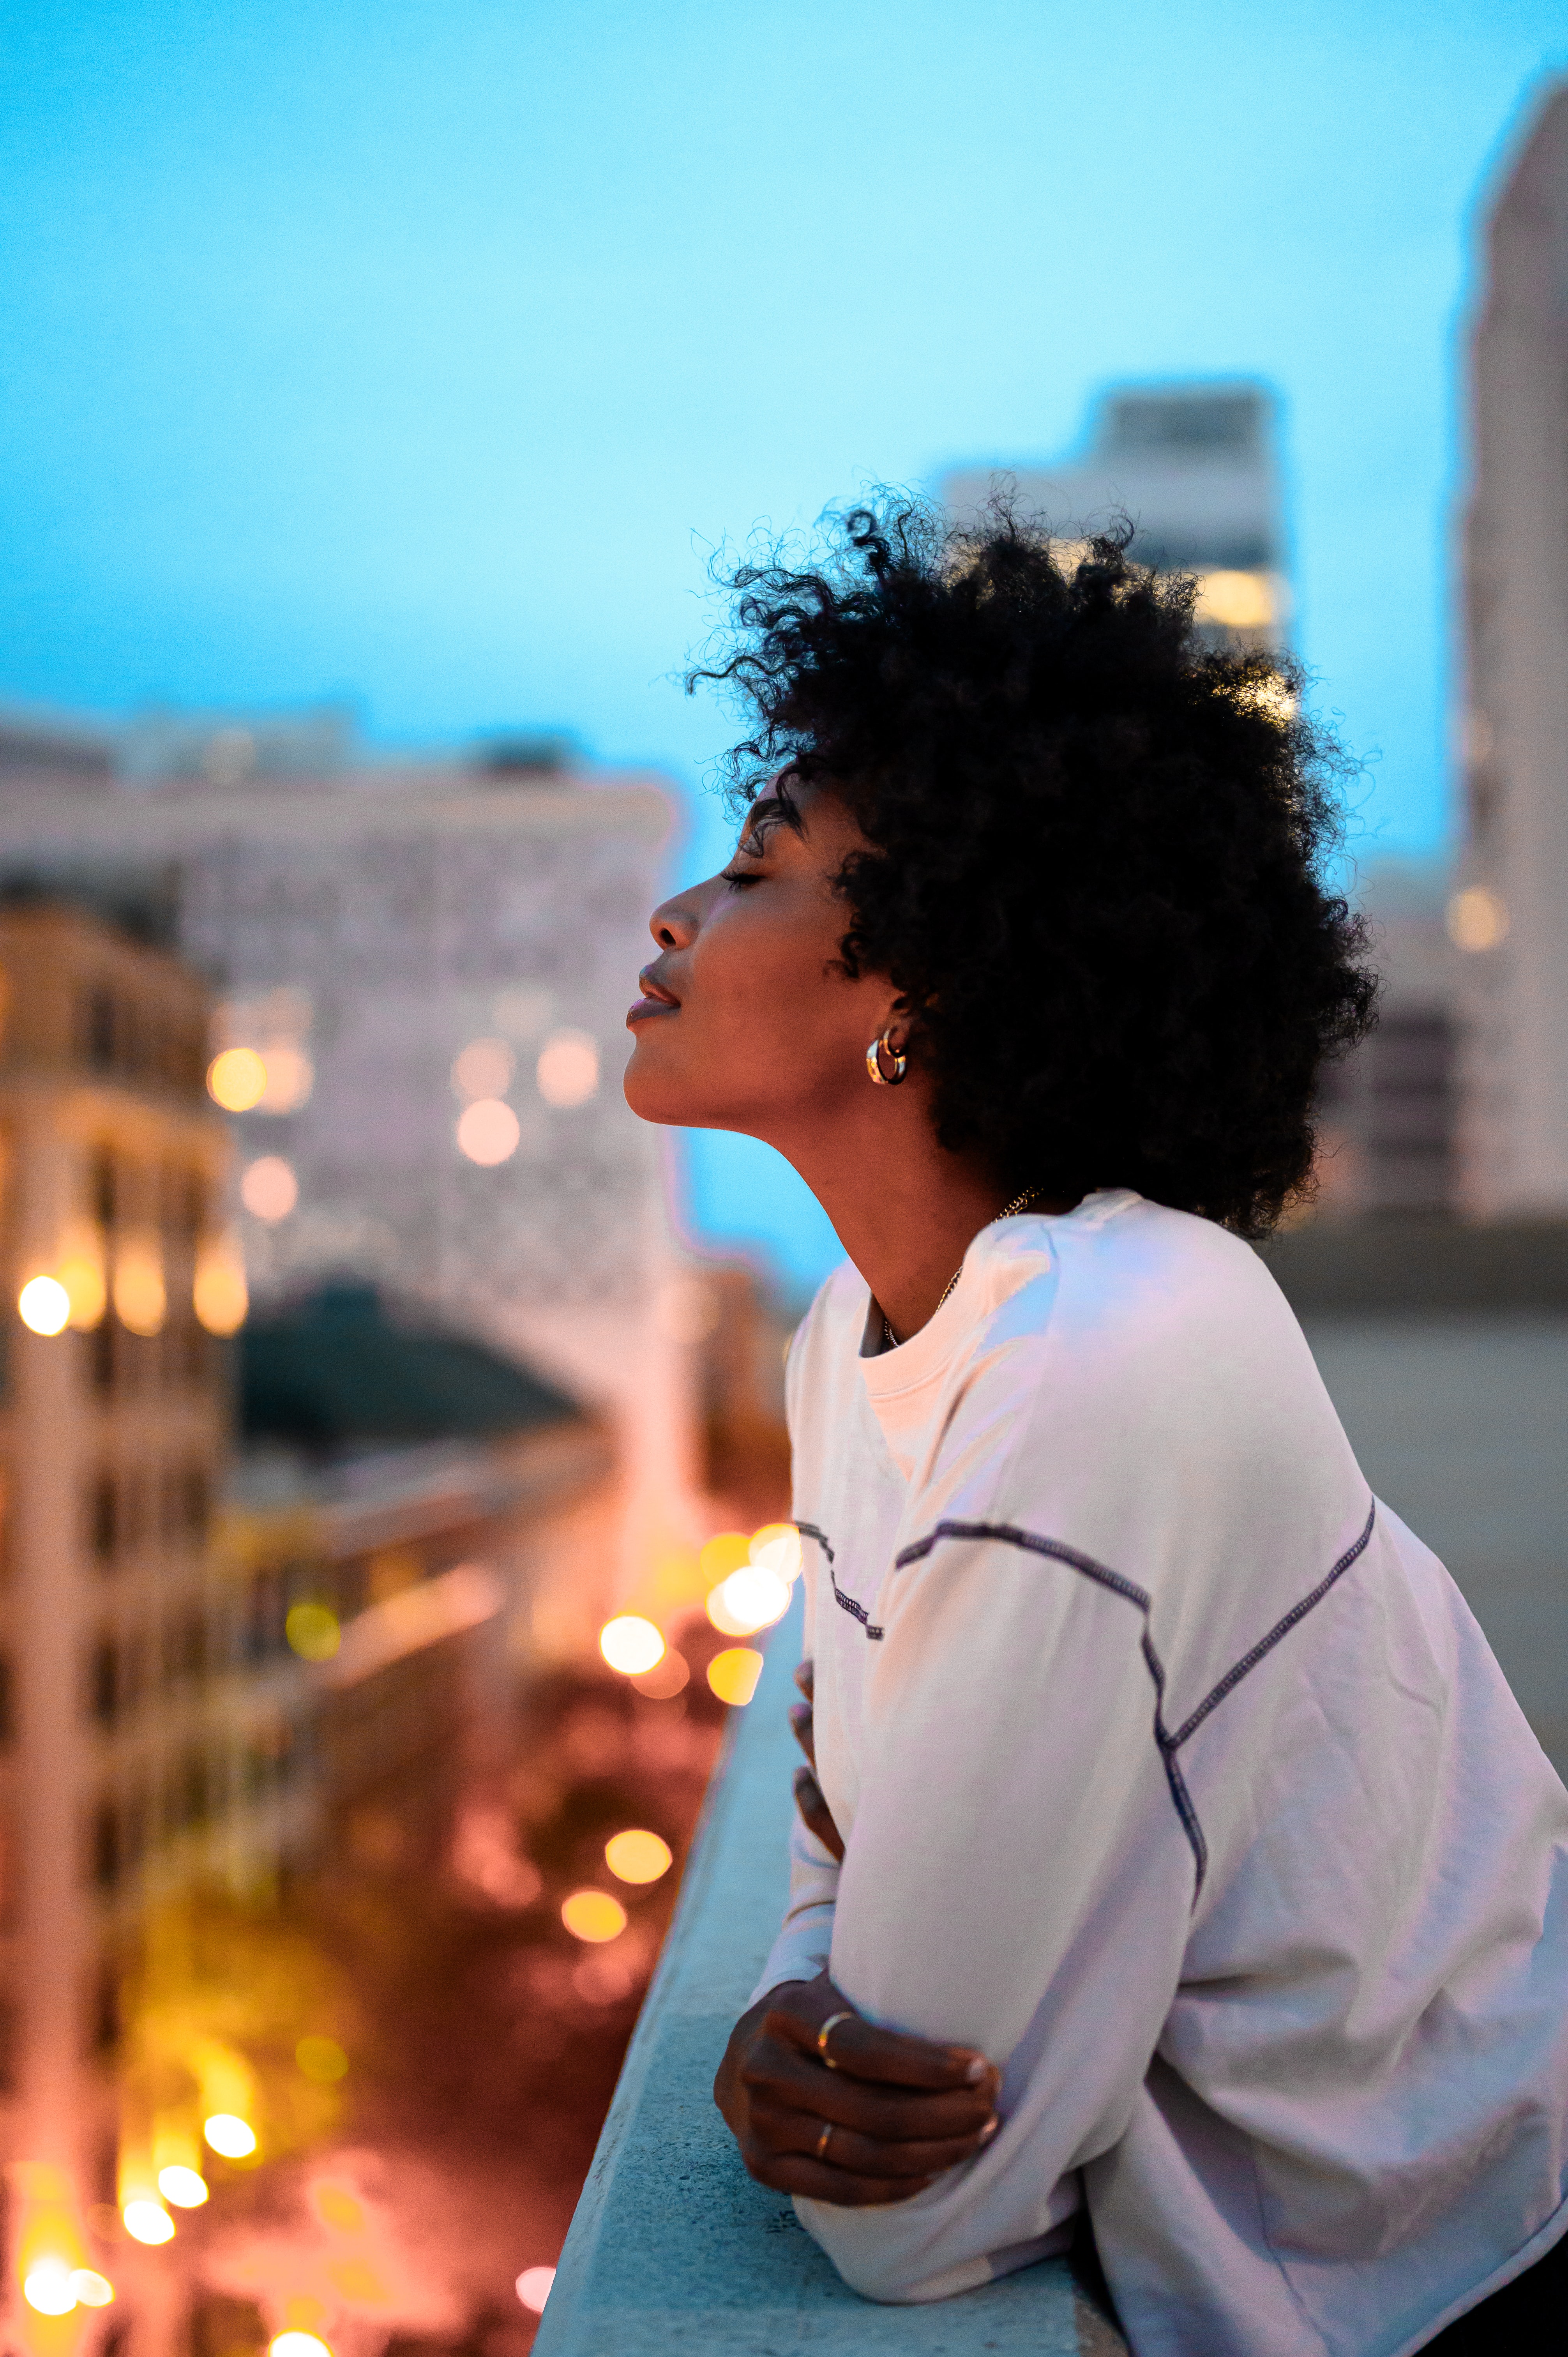 An African American woman stands on a city balcony at dusk